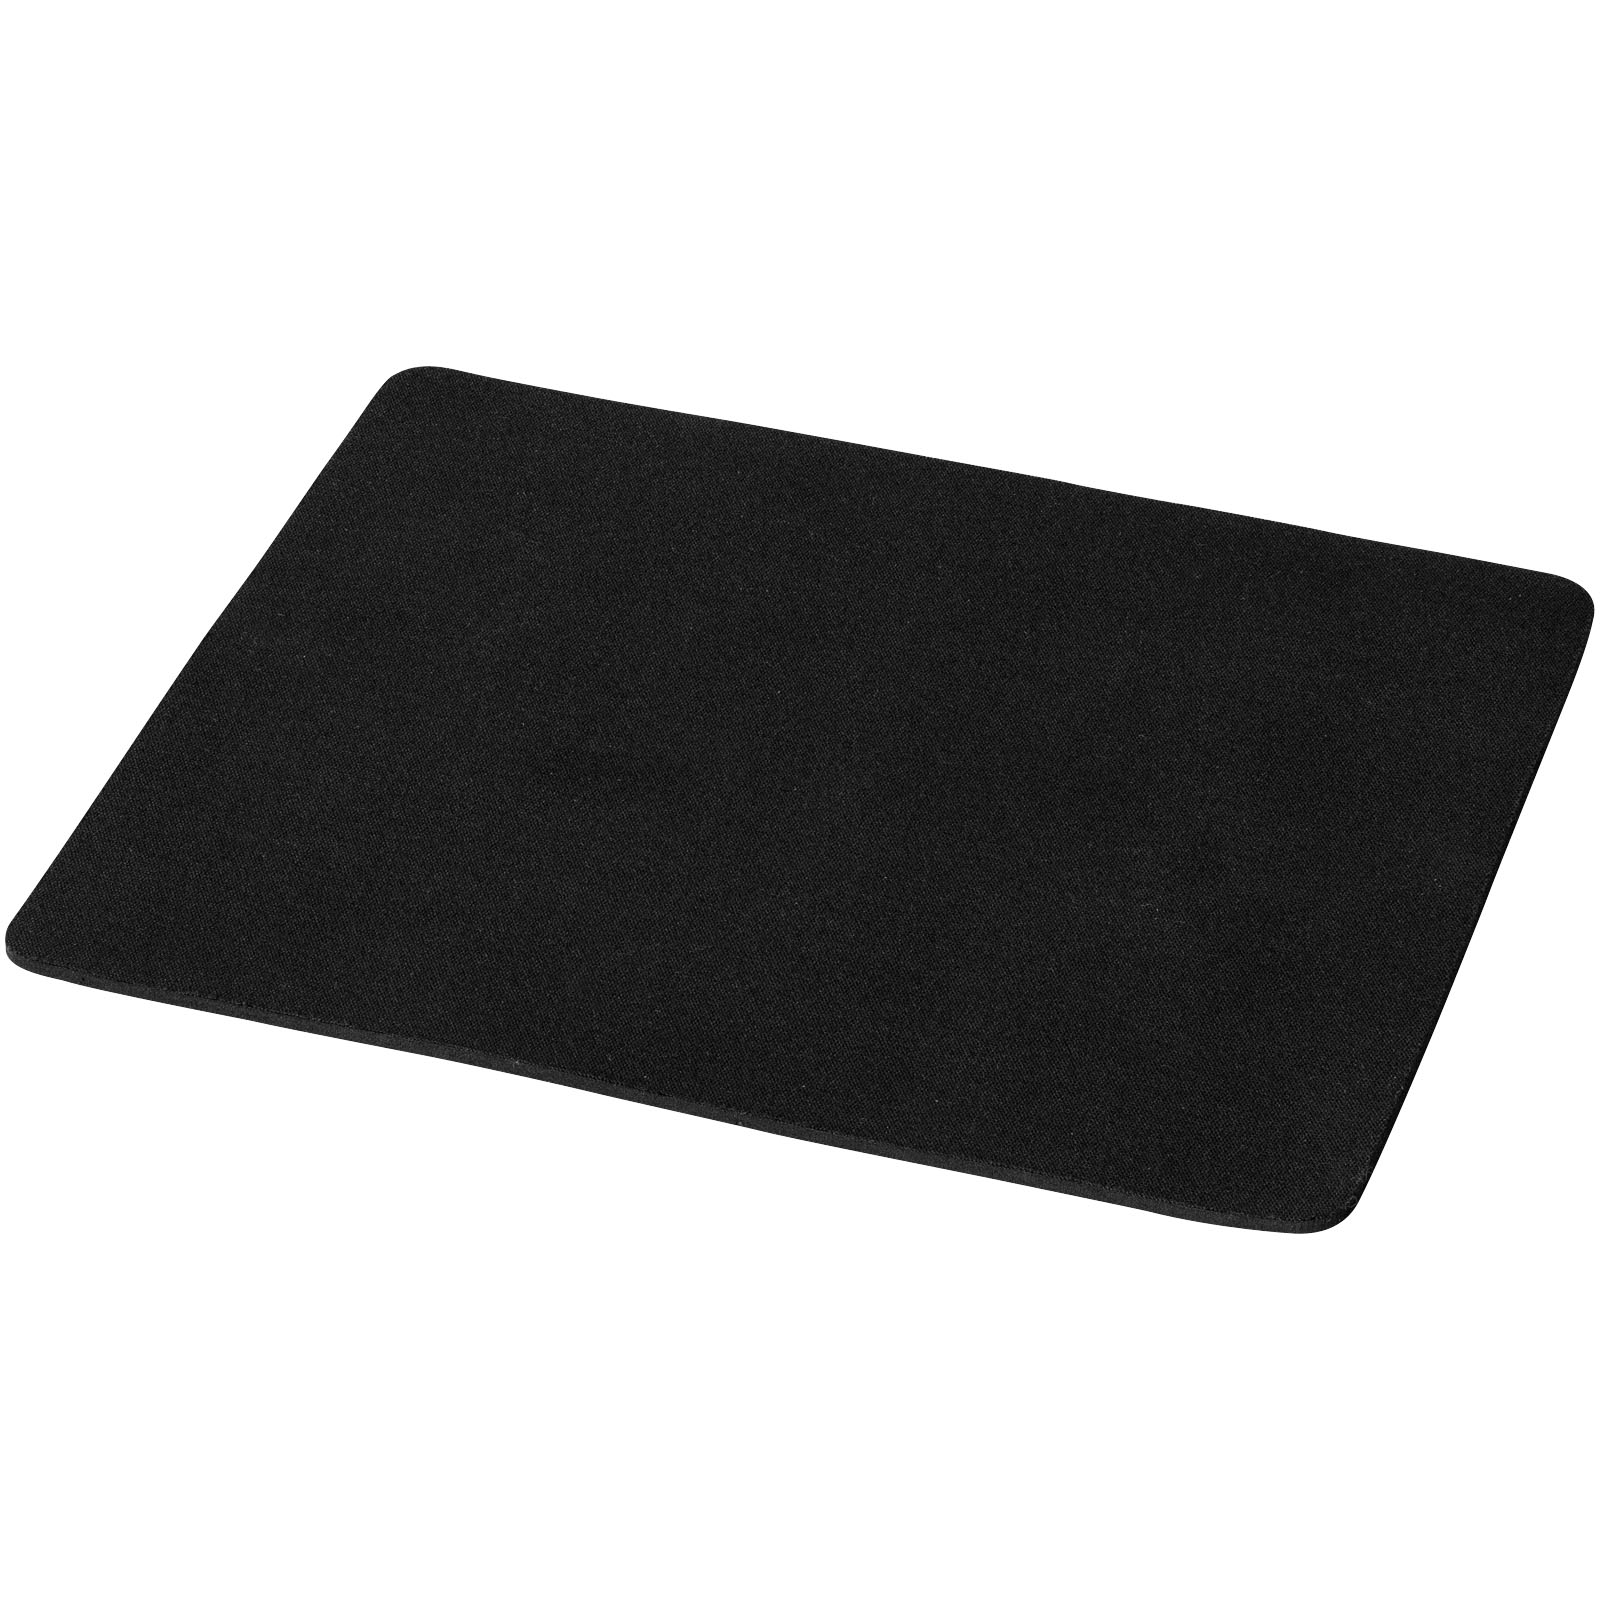 Advertising Desk Accessories - Heli flexible mouse pad